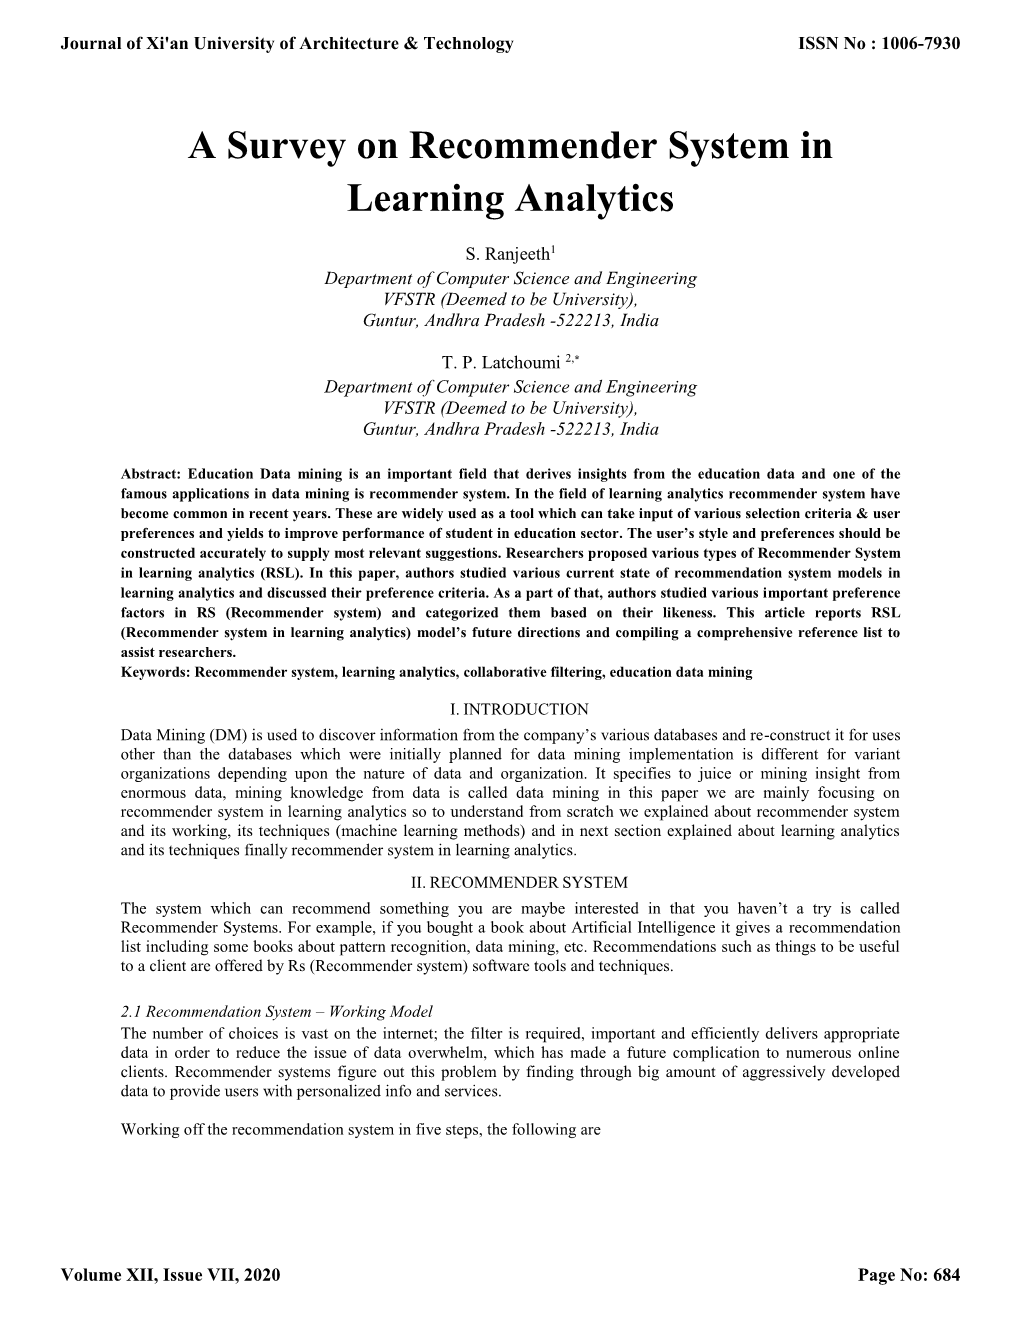 A Survey on Recommender System in Learning Analytics